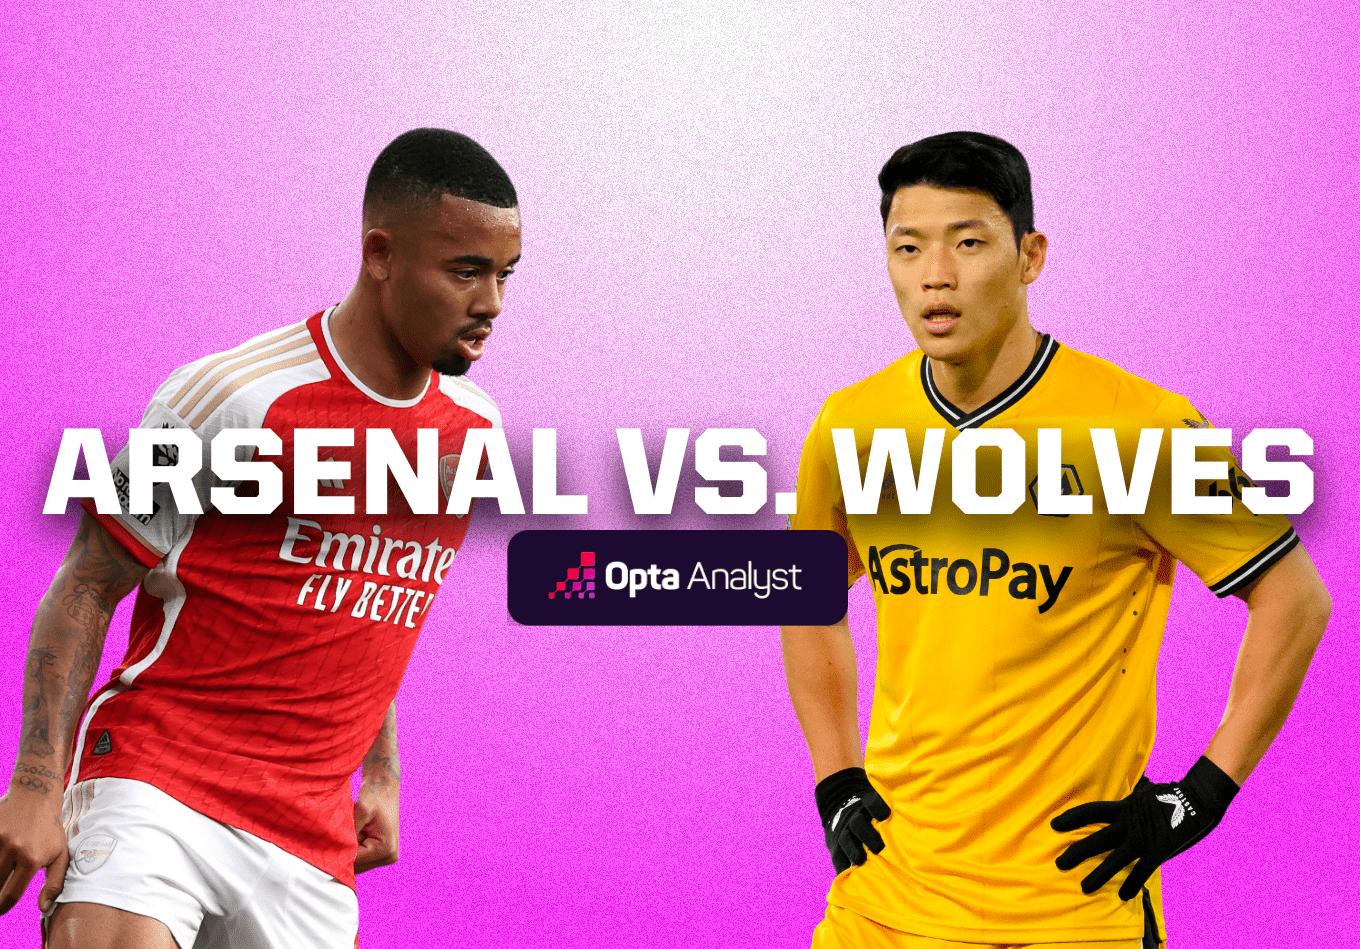 Arsenal vs Wolves: Prediction and Preview